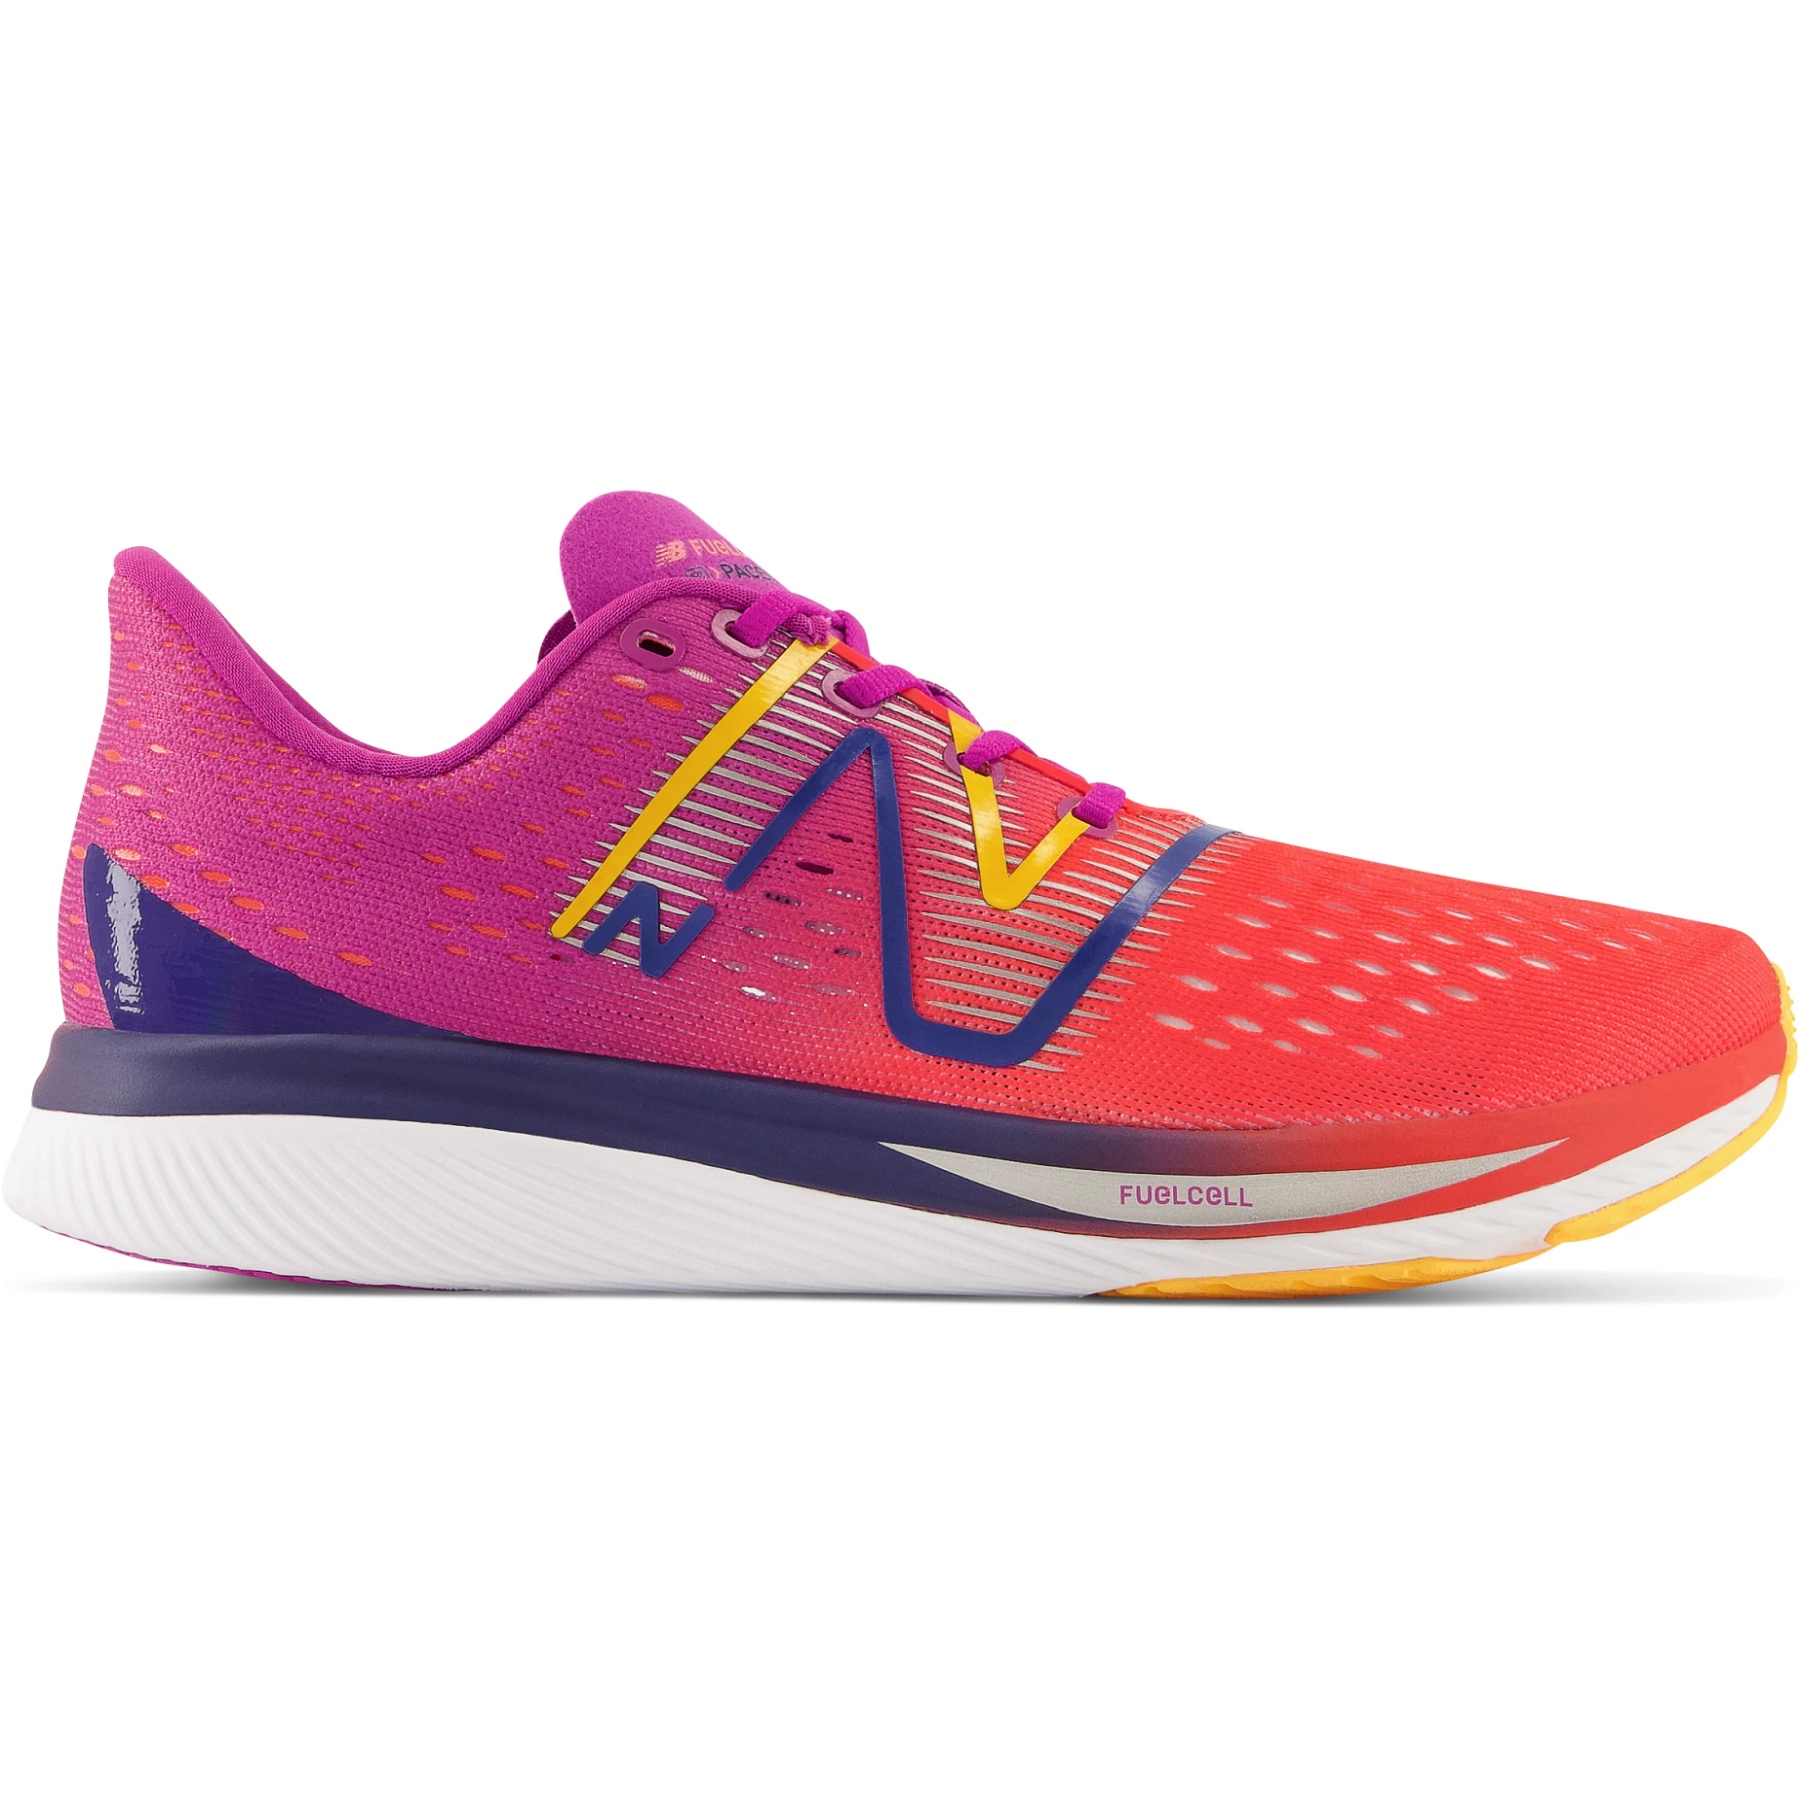 Productfoto van New Balance FuelCell SuperComp Pacer Running Shoe Women - Red